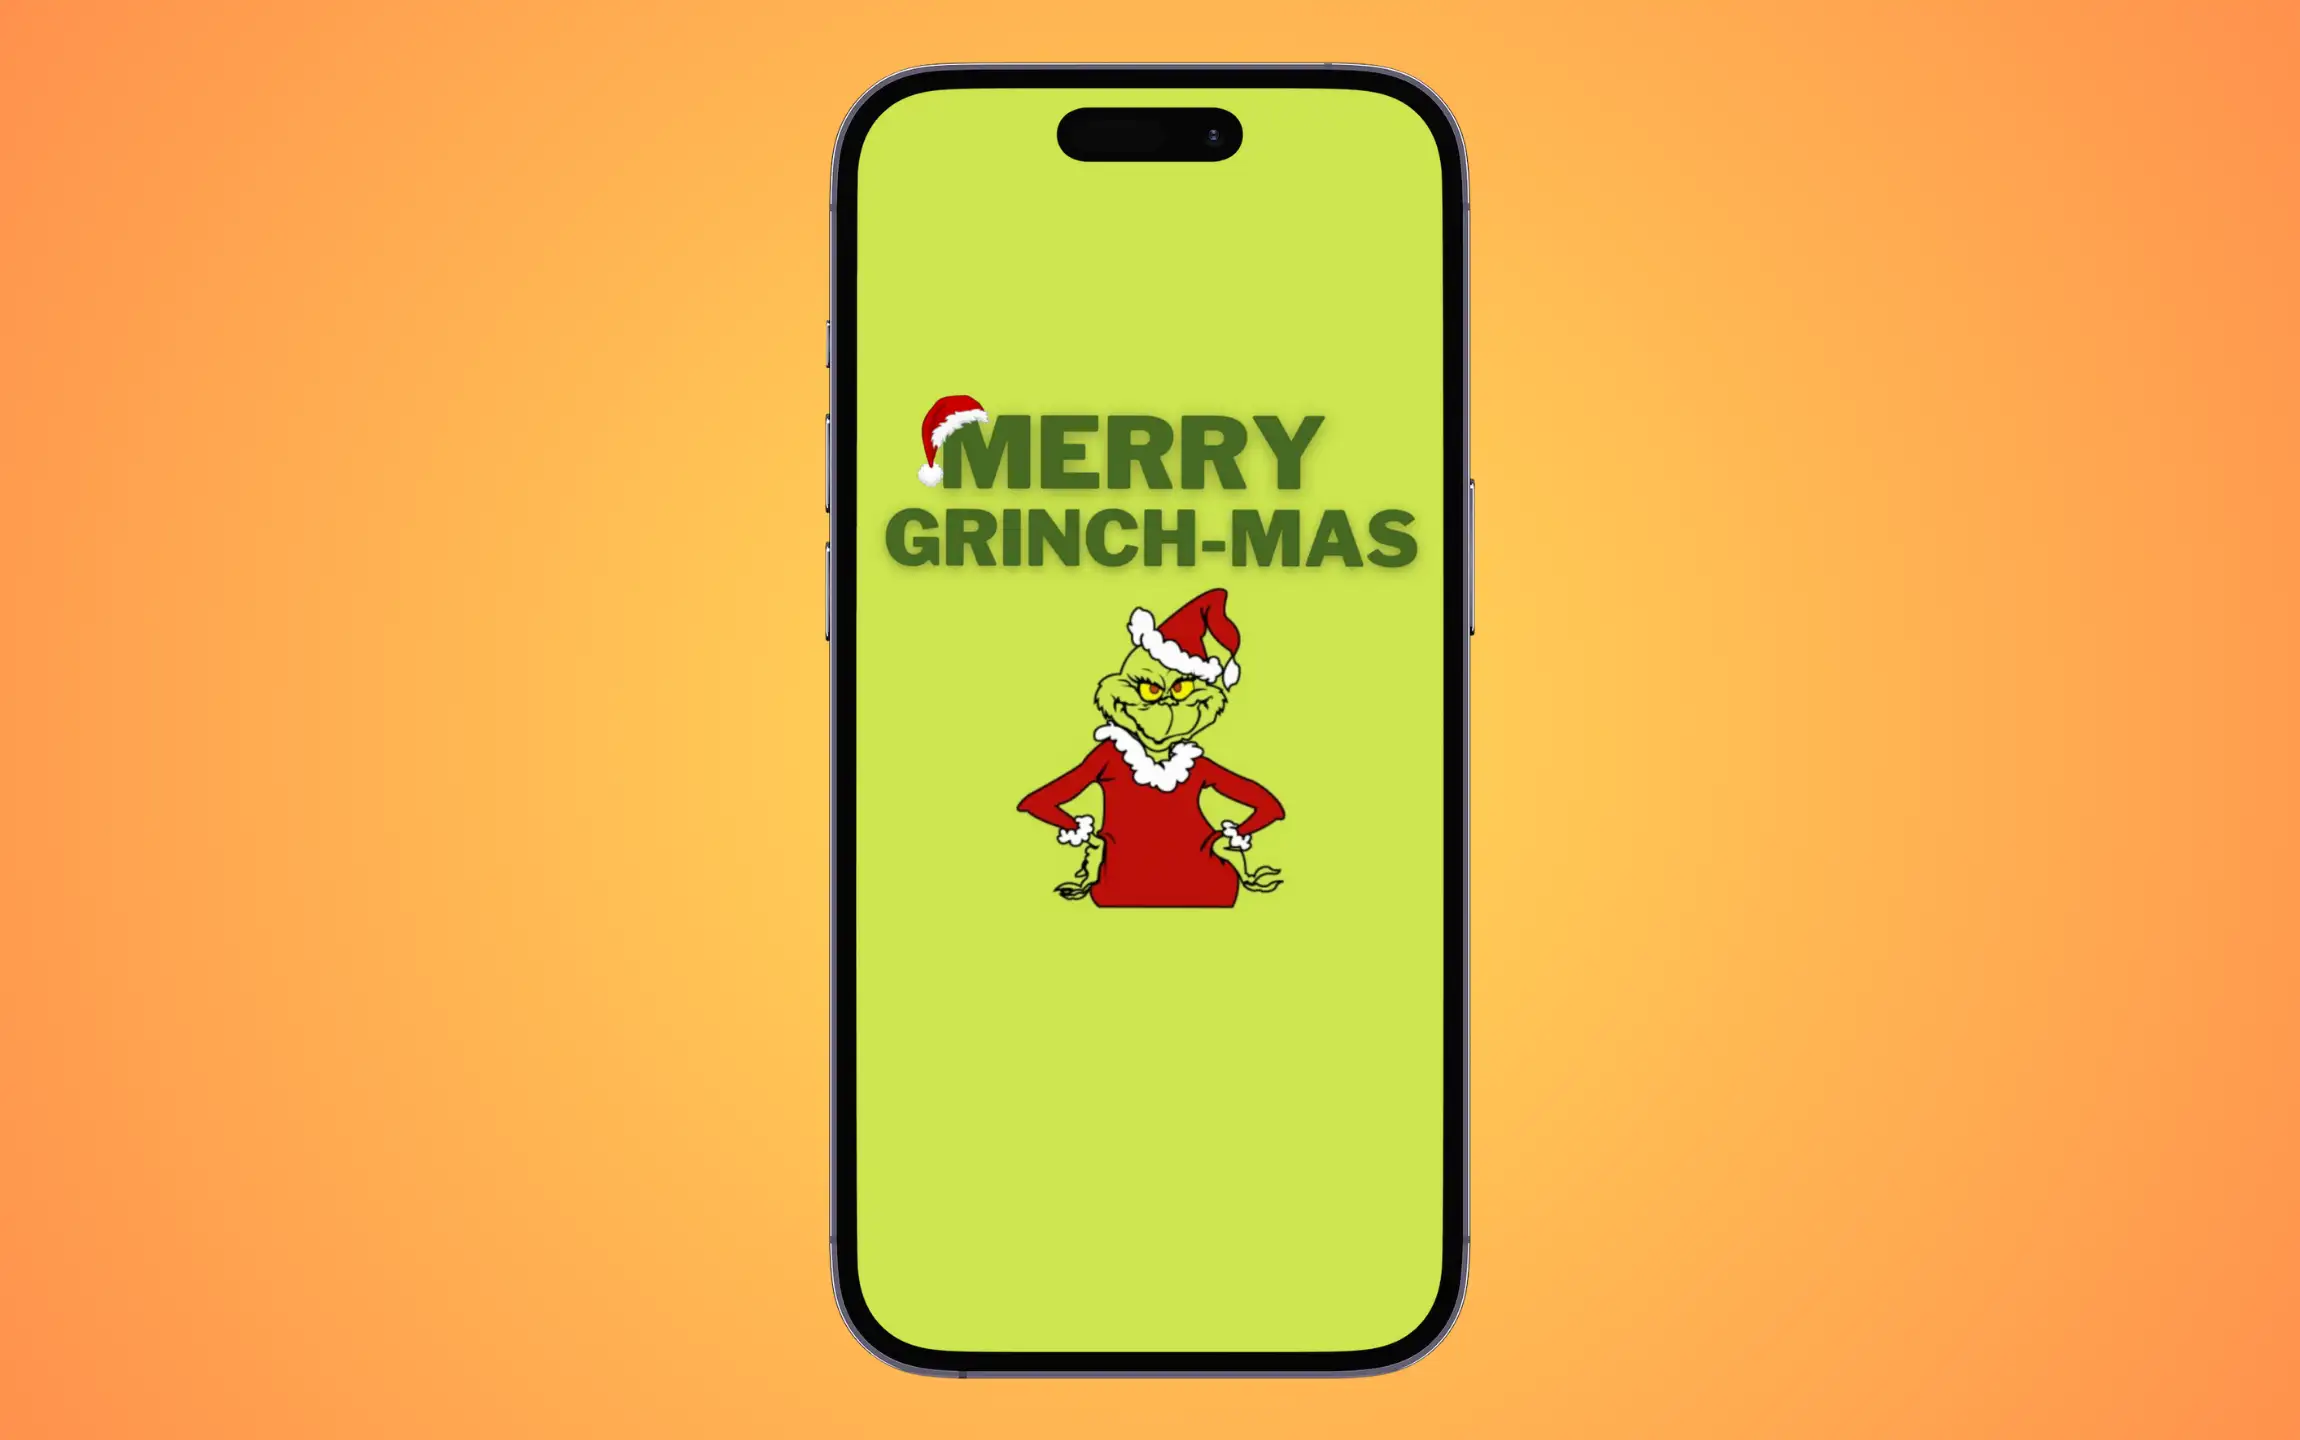 Merry Grinch-mas wallpaper for iPhone